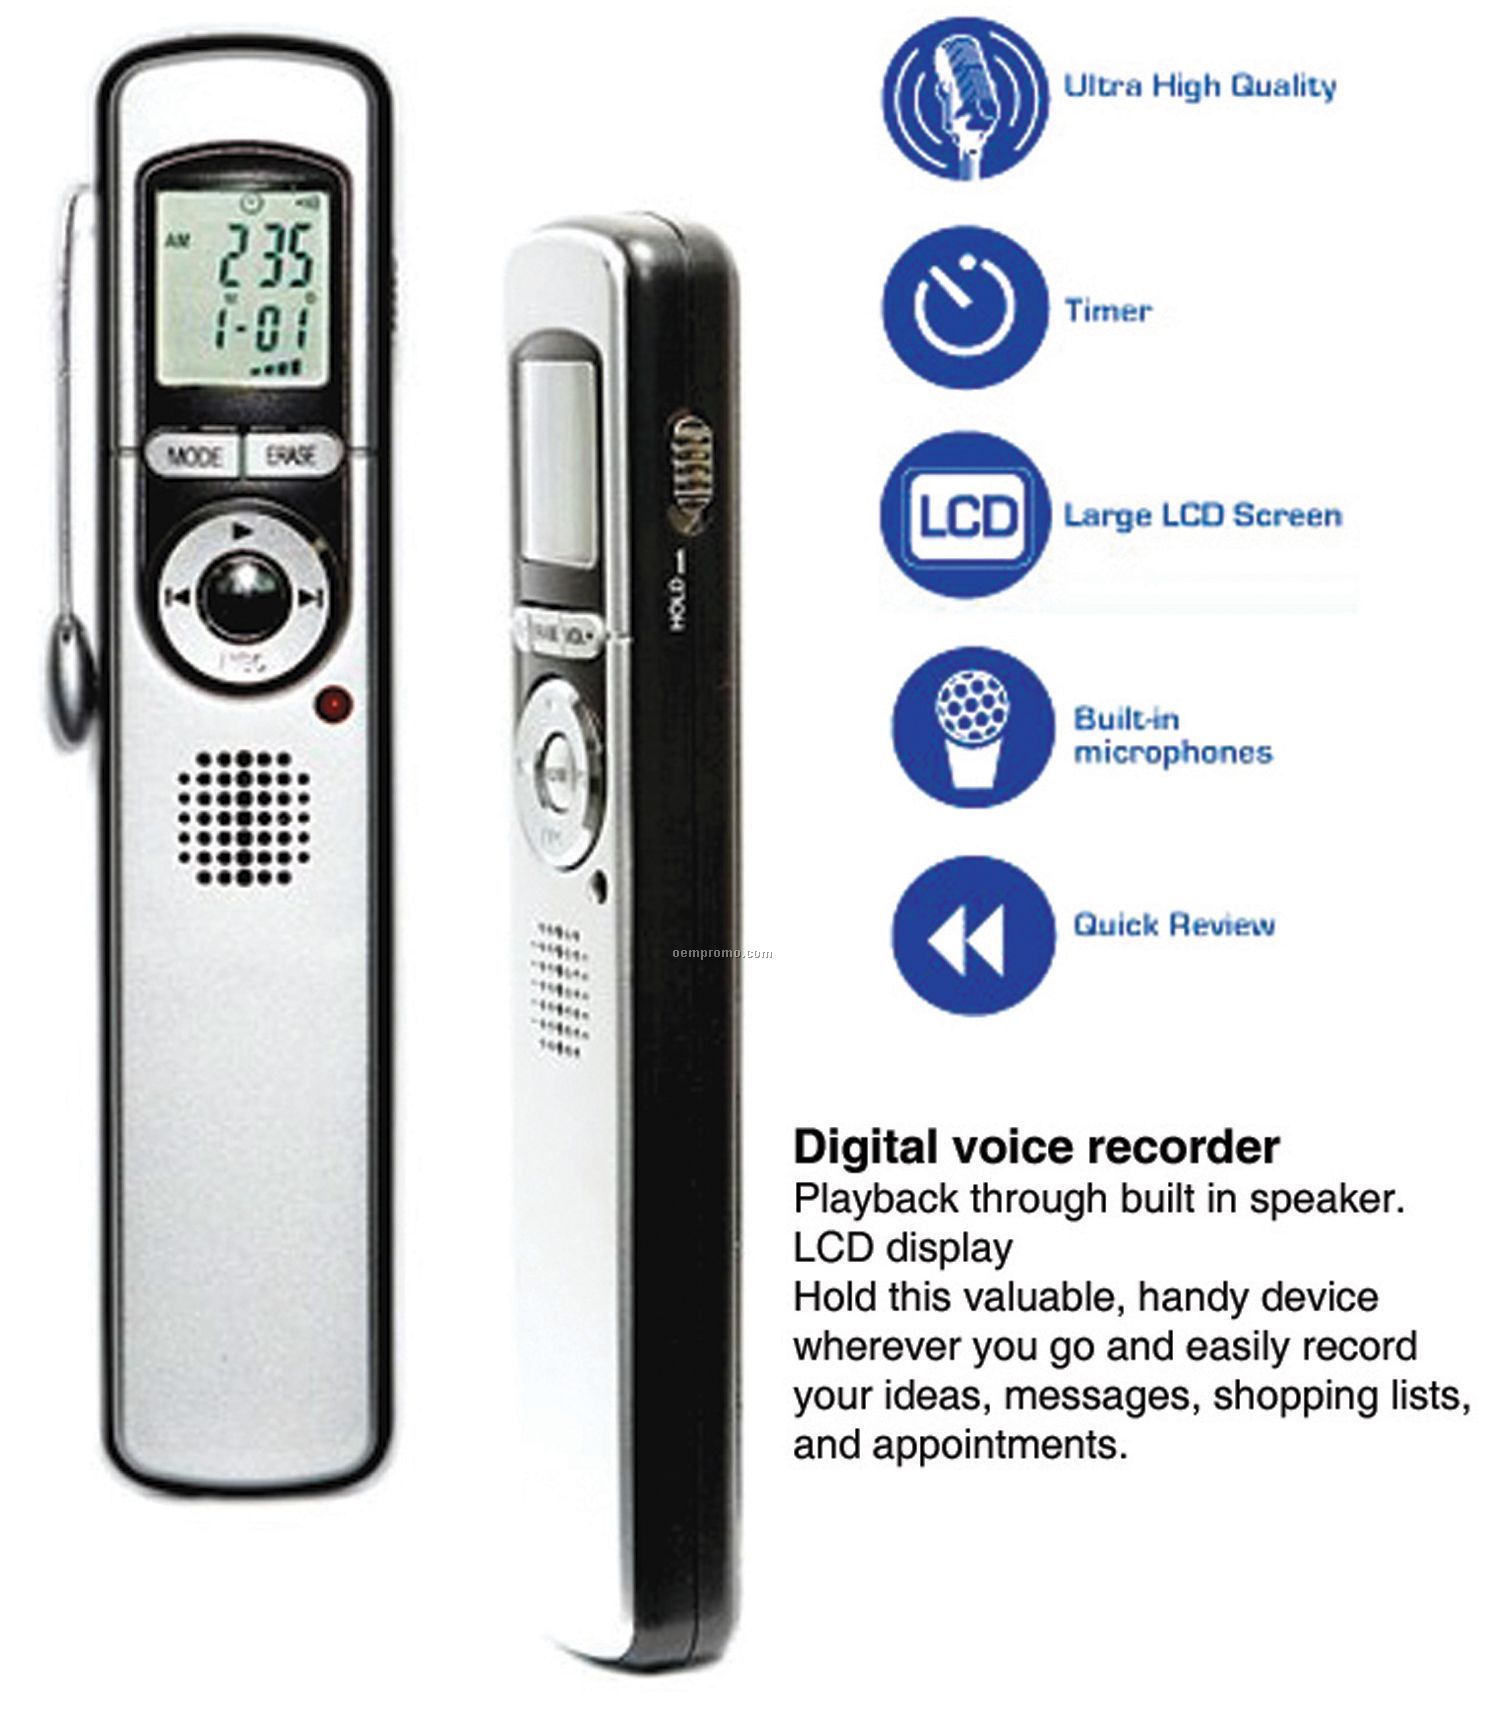 Digital Voice Recorder - 30 Minutes Recording Time